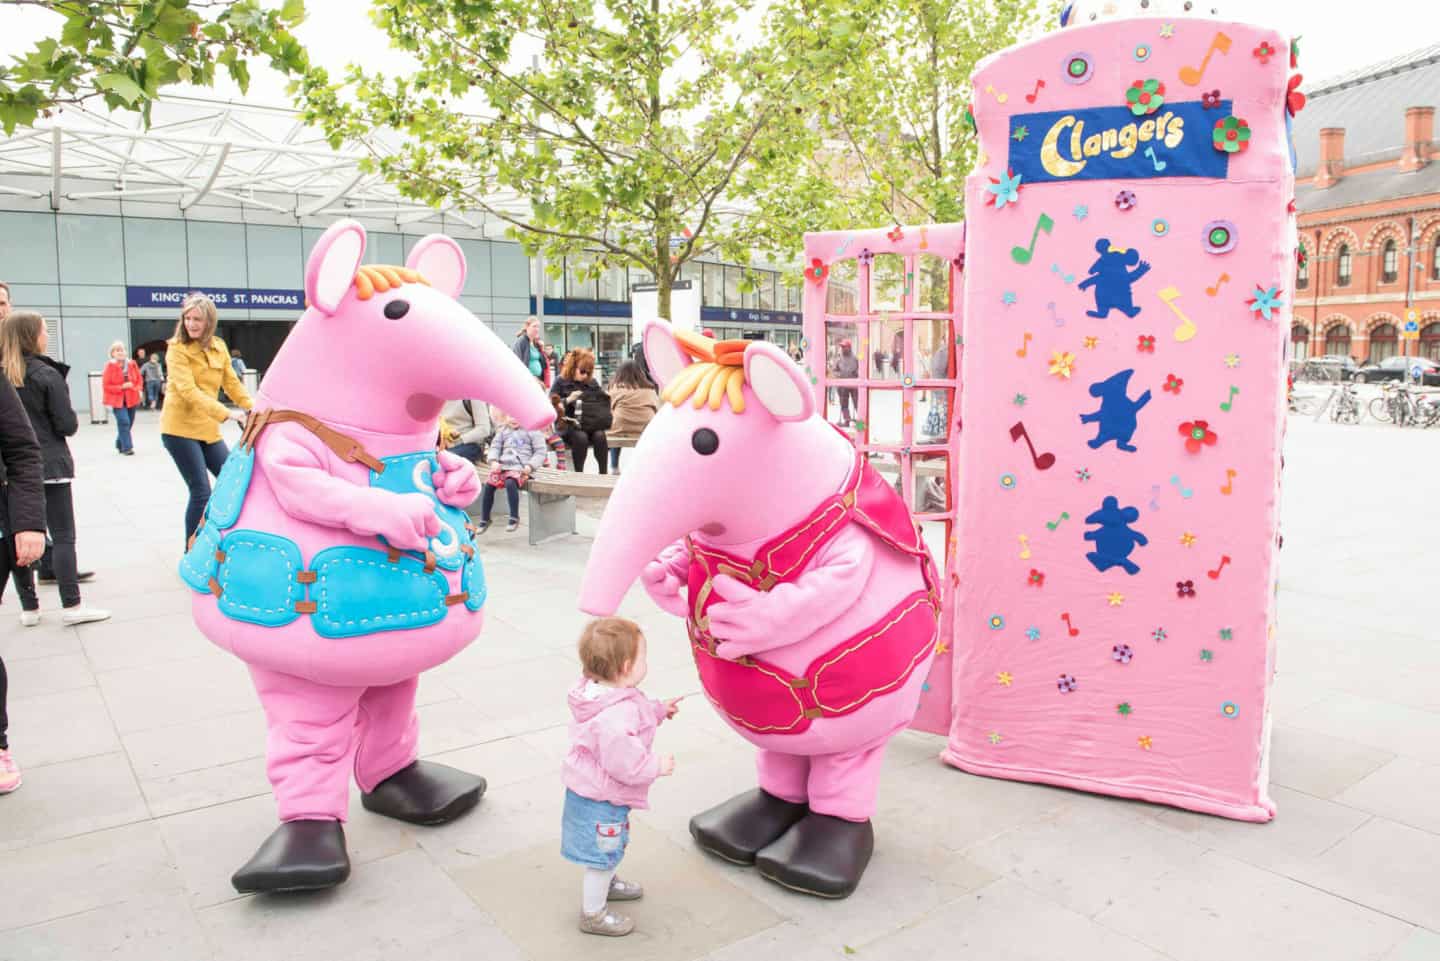 Call the Clangers at King's Cross 3